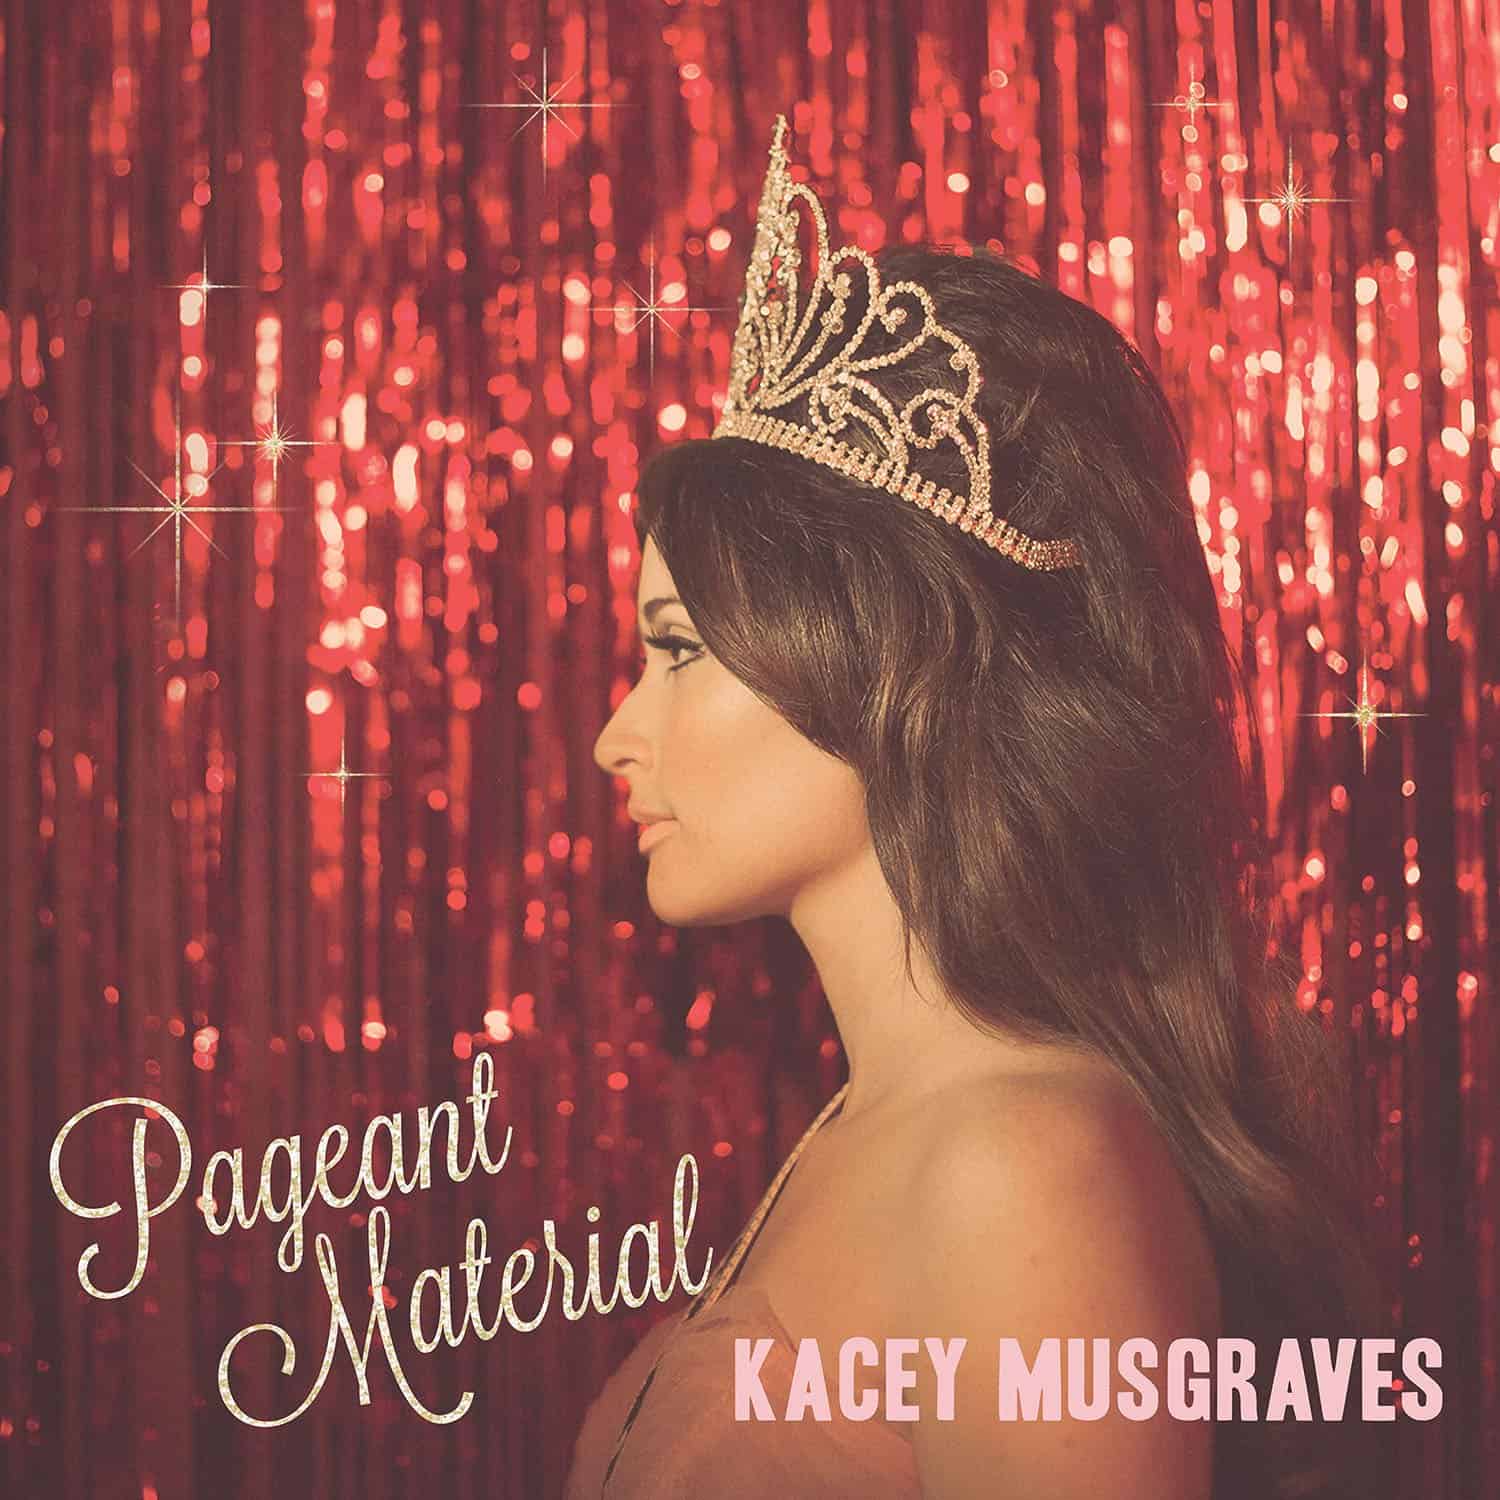 kacey-musgraves-pageant-material-vinyl-record-album-1